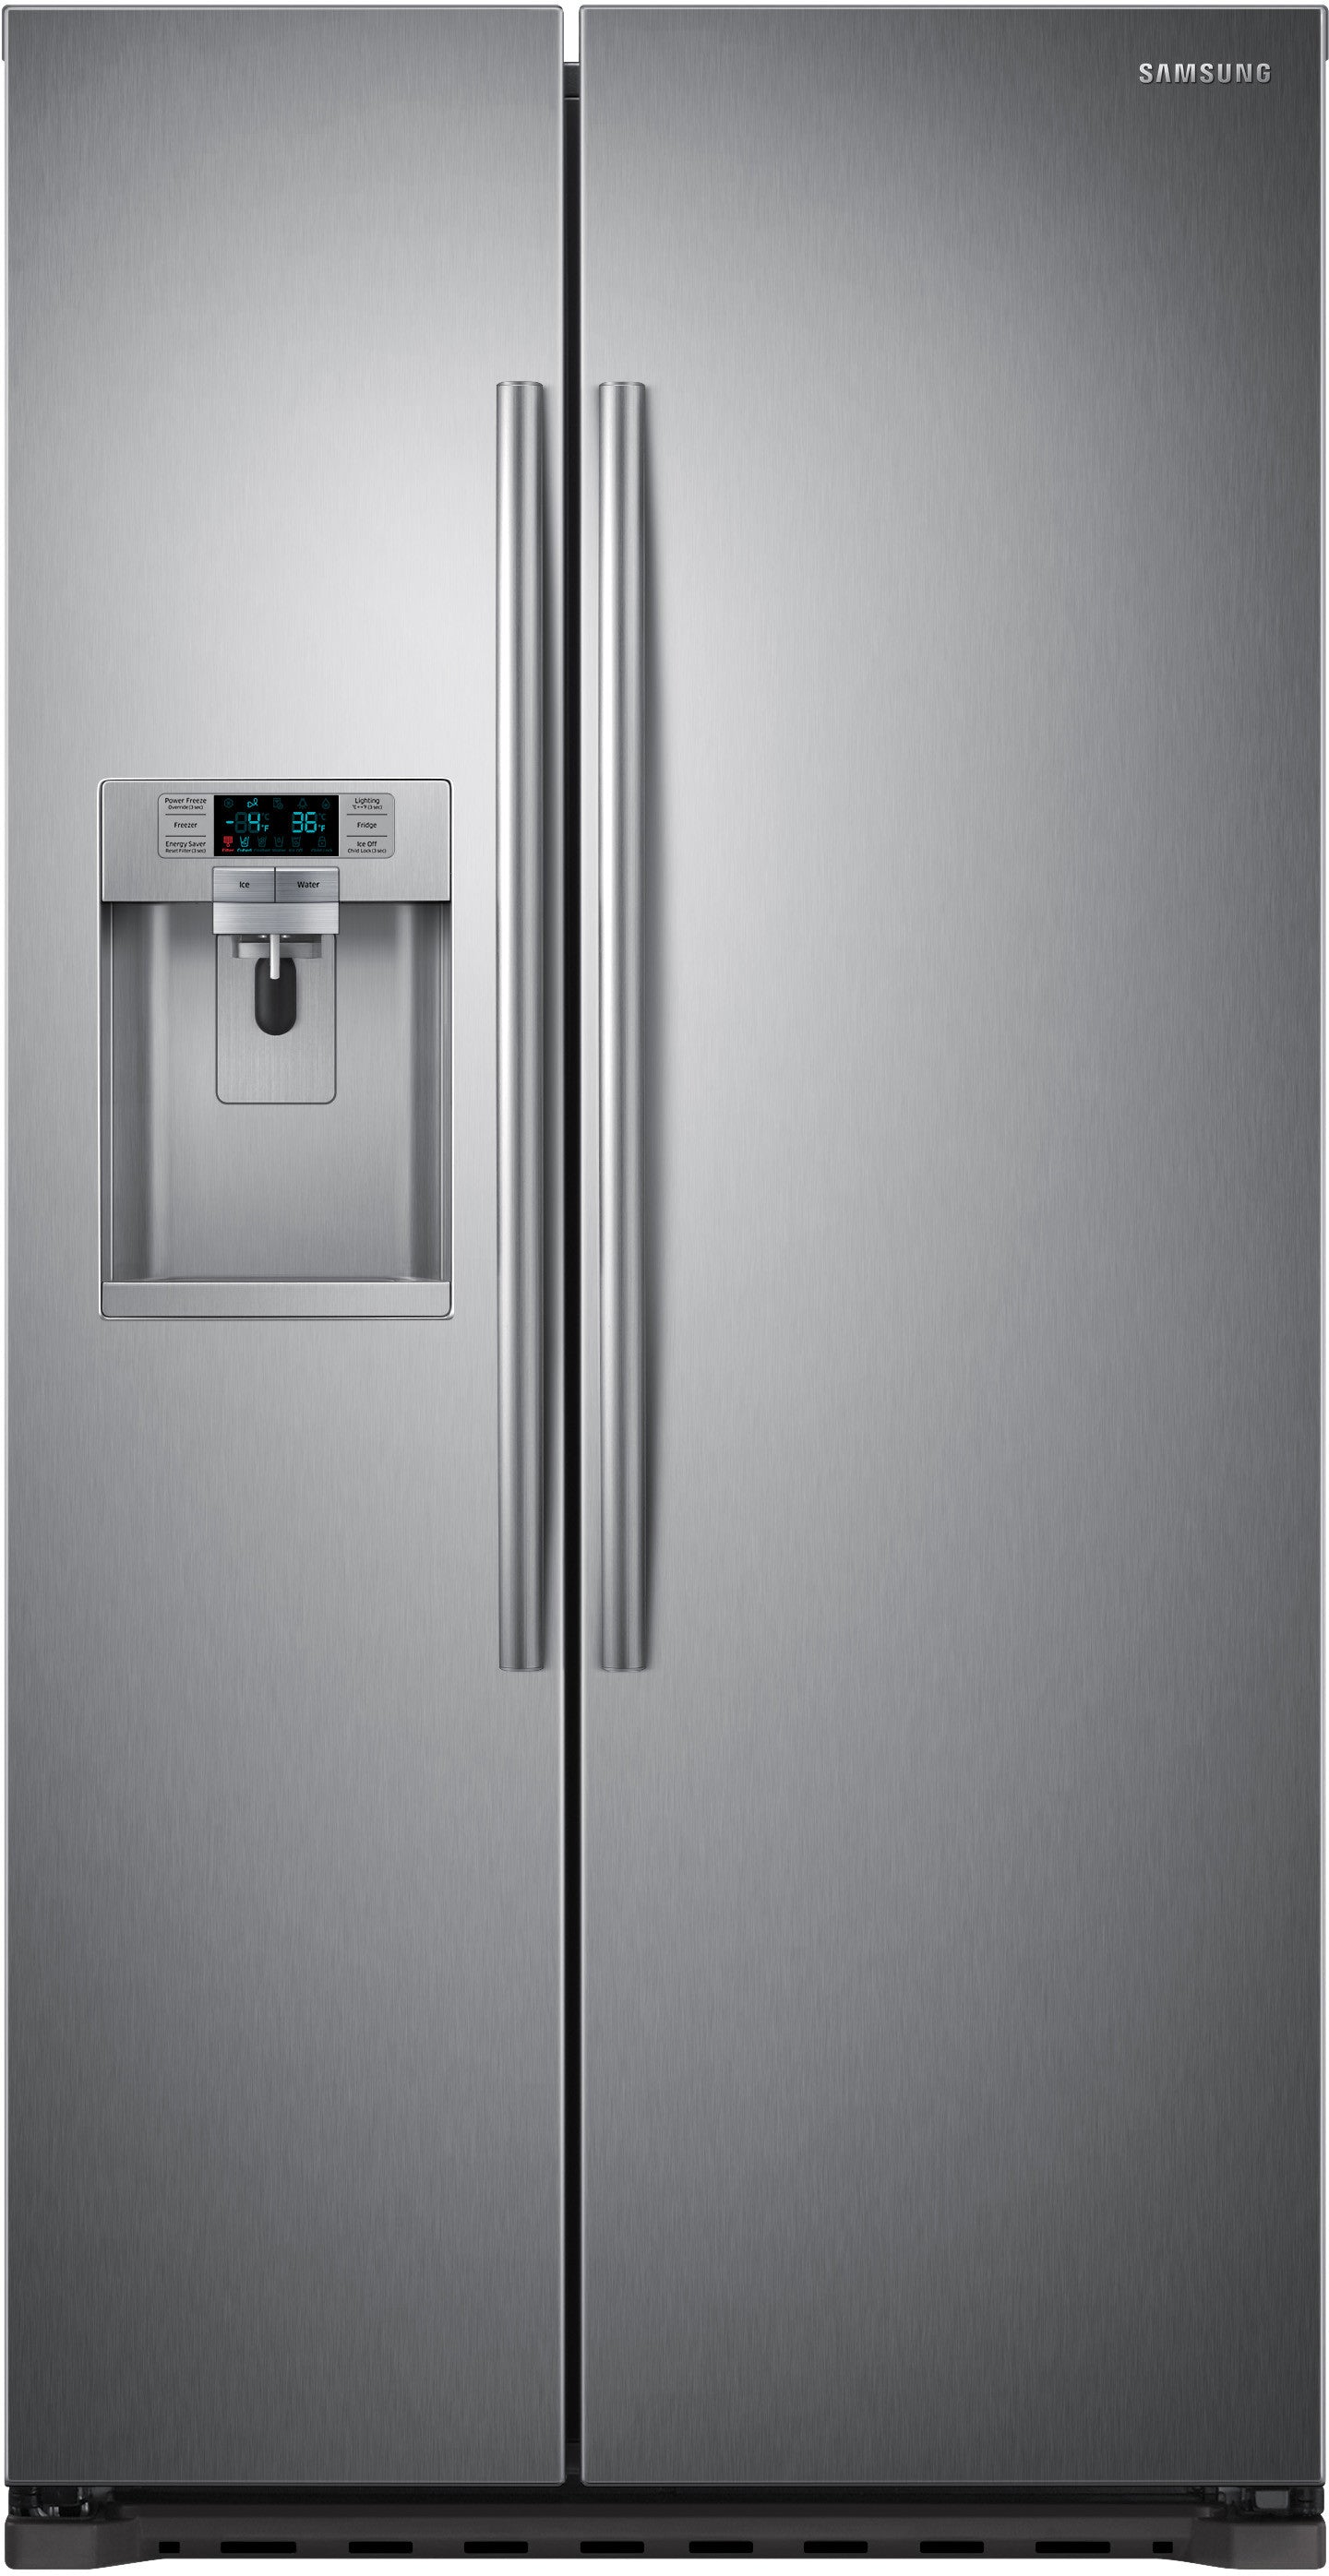 Samsung RS22HDHPNSR/AA 22.3 Cu. Ft. Counter-depth Side-by-side Refrigerator